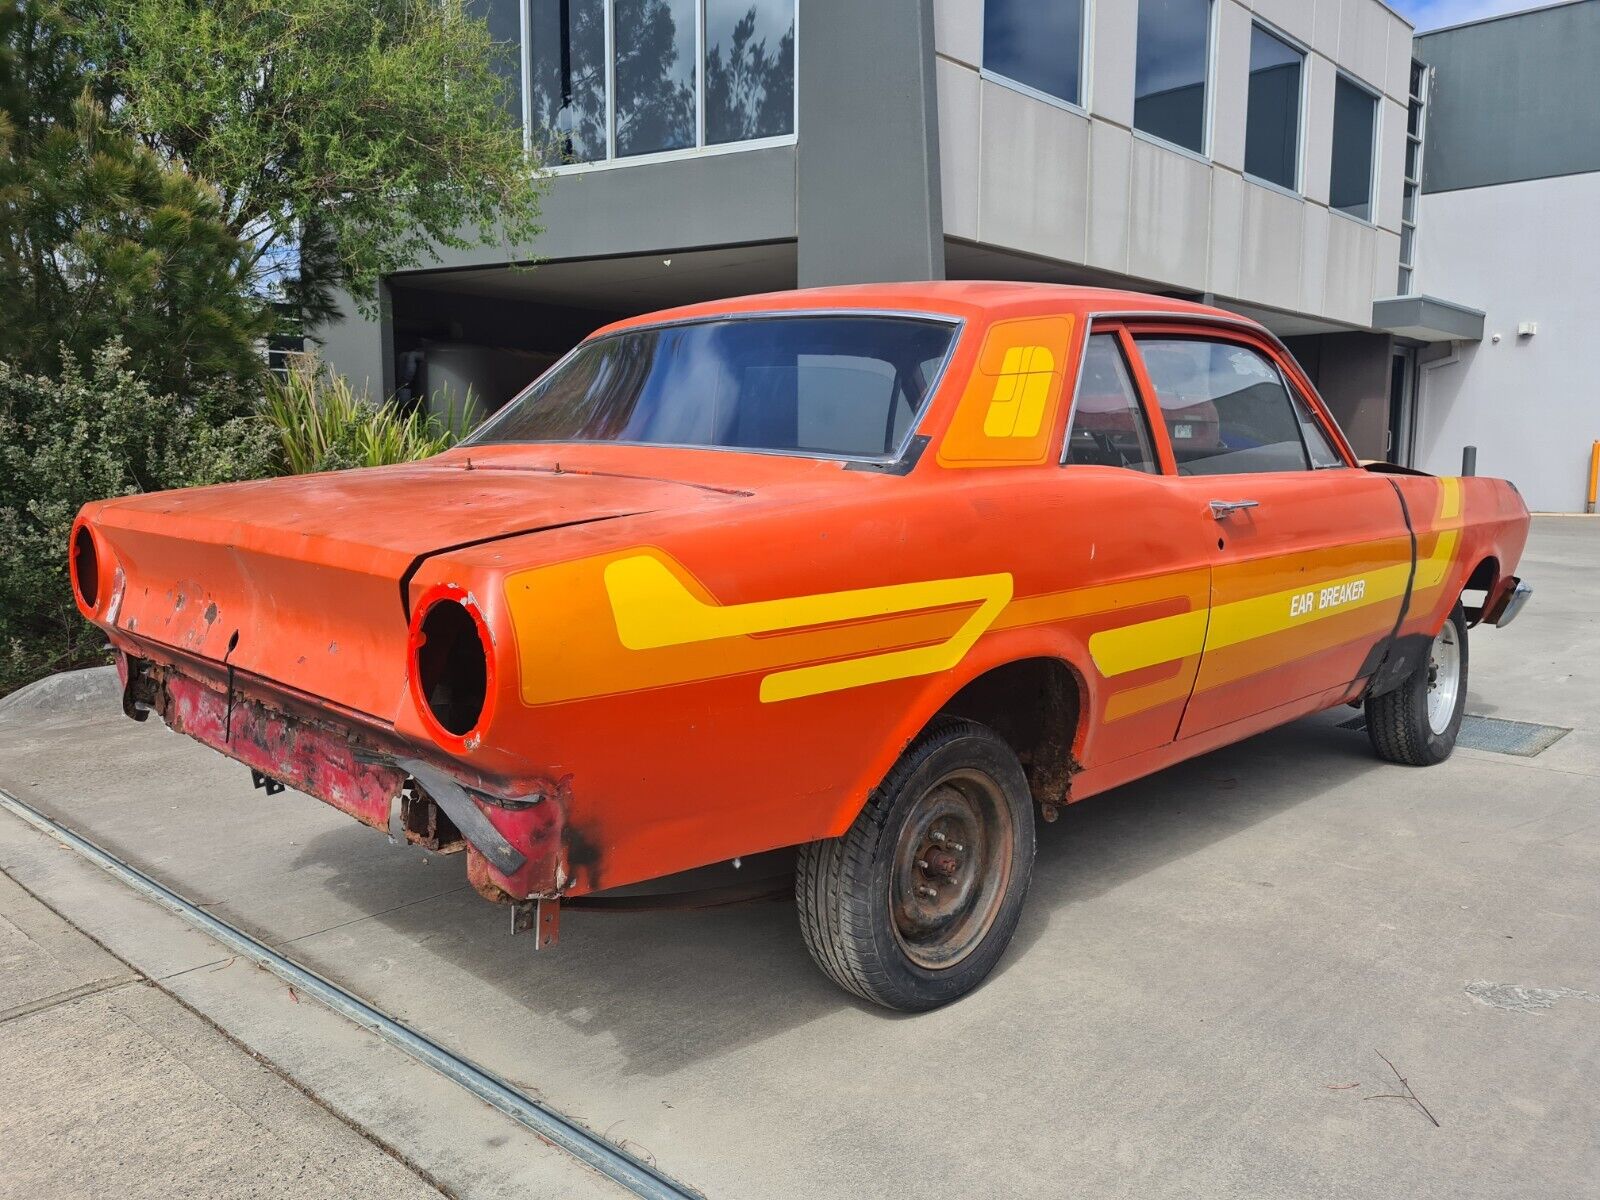 1966 Ford Falcon Coupe - Like XY, XW, XR, XT